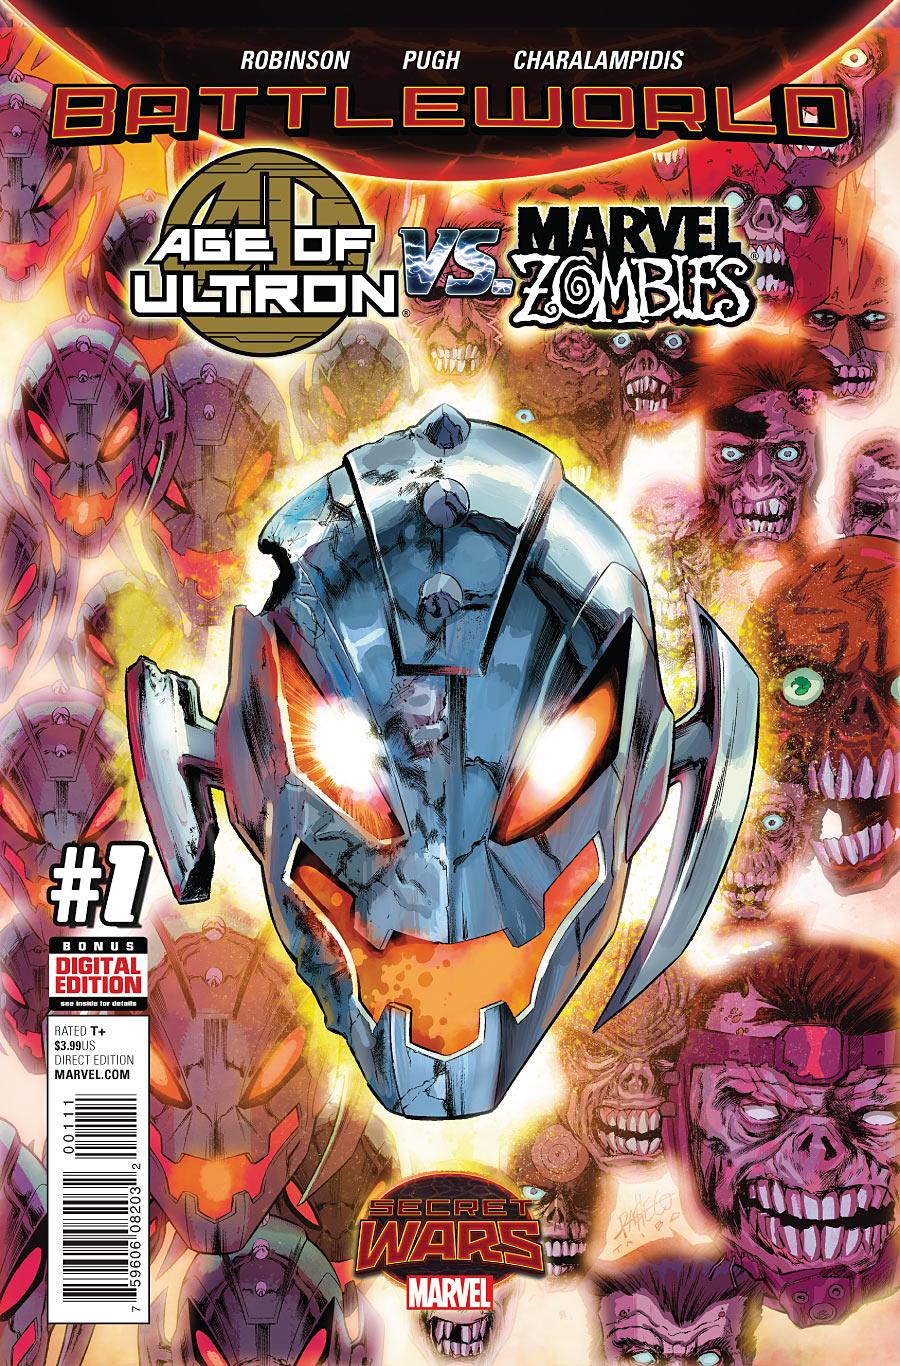 Age of Ultron vs. Marvel Zombies Vol. 1 #1